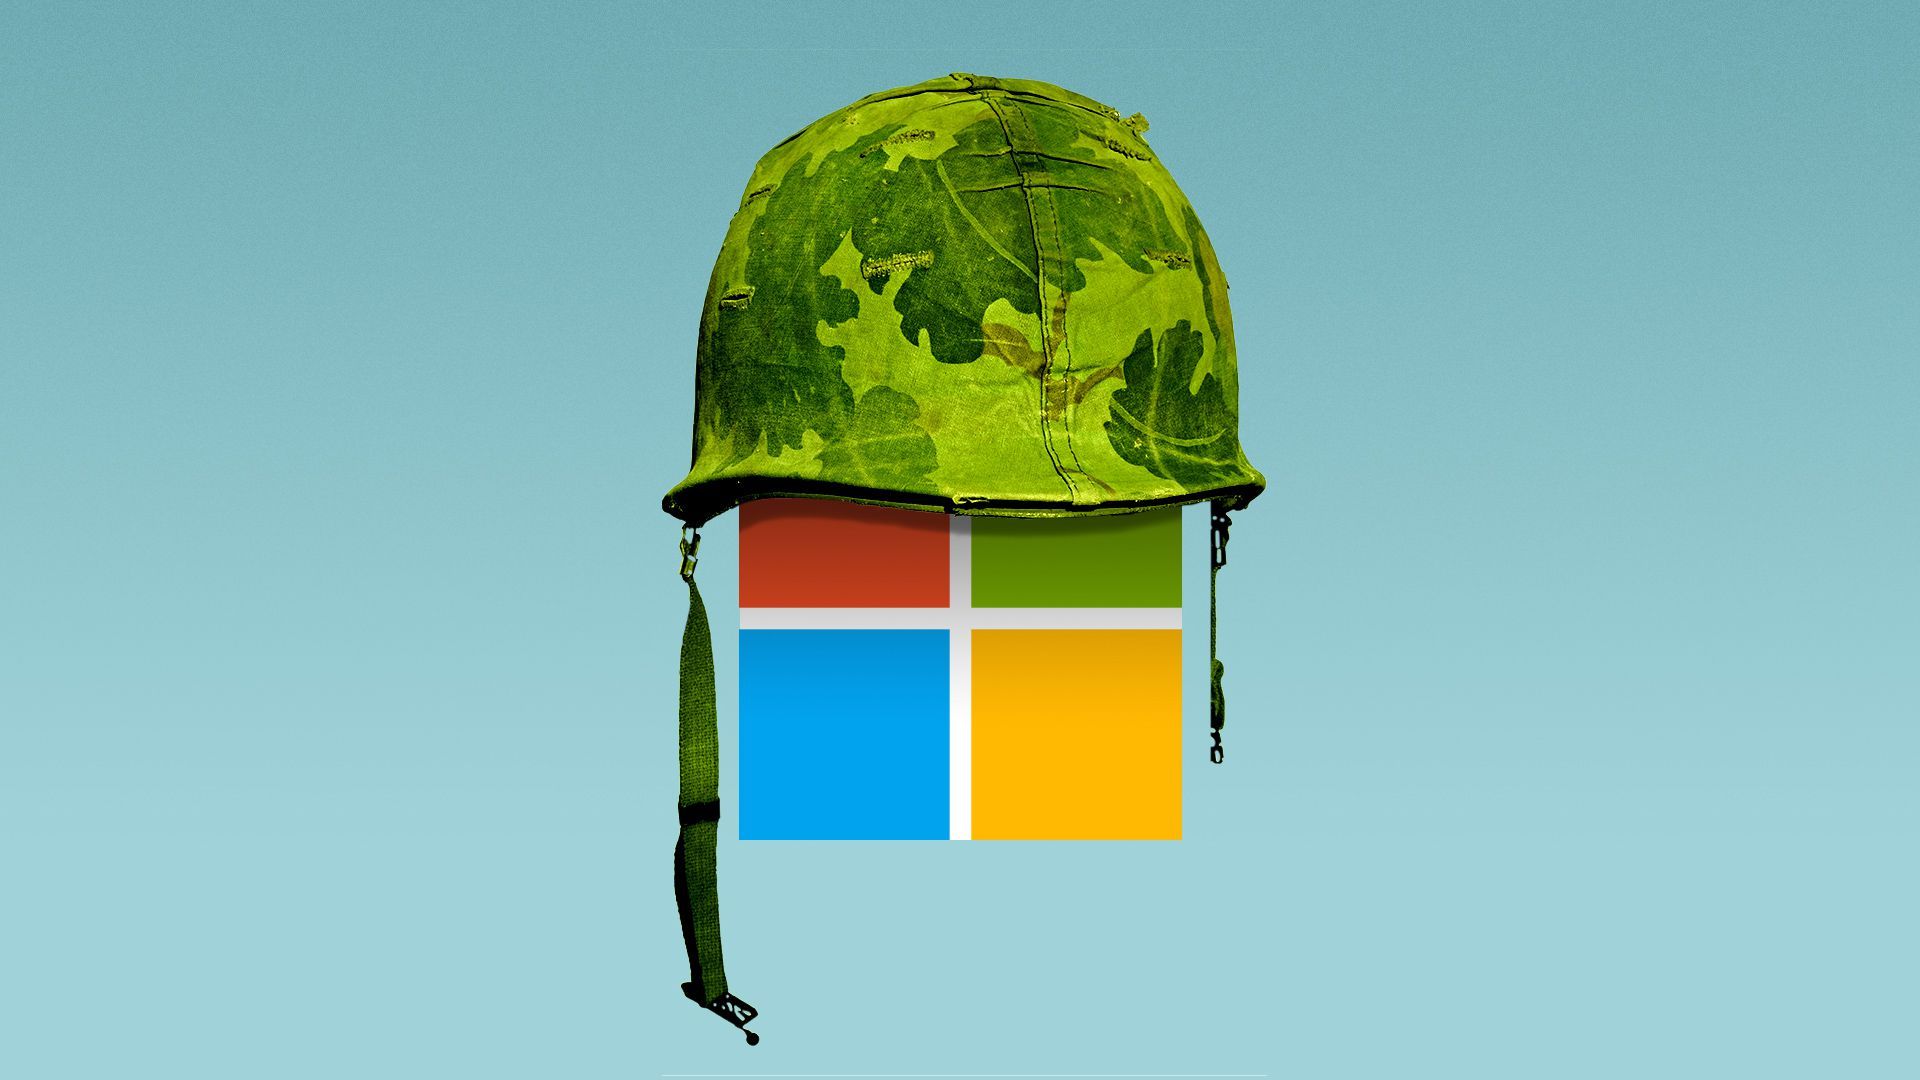 Illustration of the Microsoft logo wearing a soldier's helmet.   